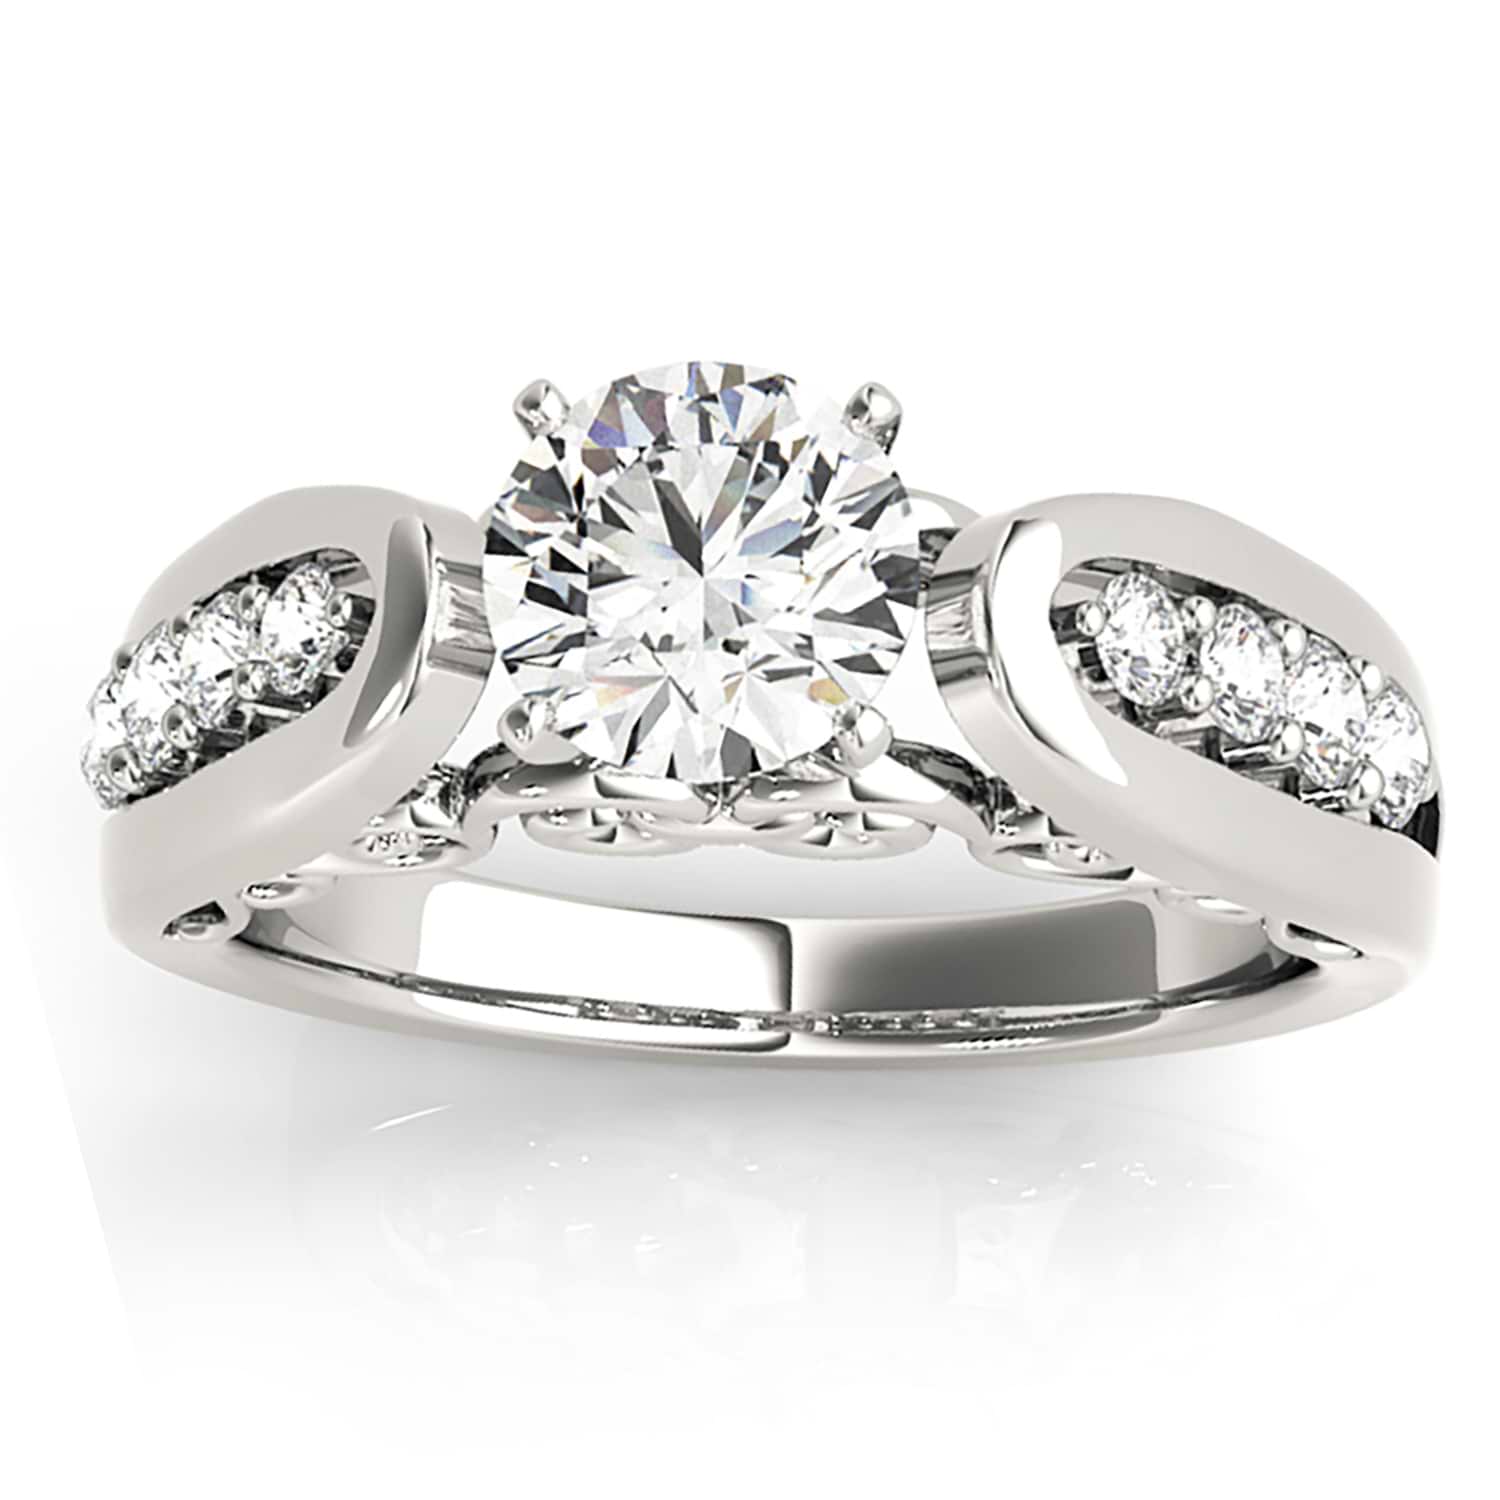 Diamond Accented Single Row Engagement Ring Setting 18k White Gold (0.20ct)